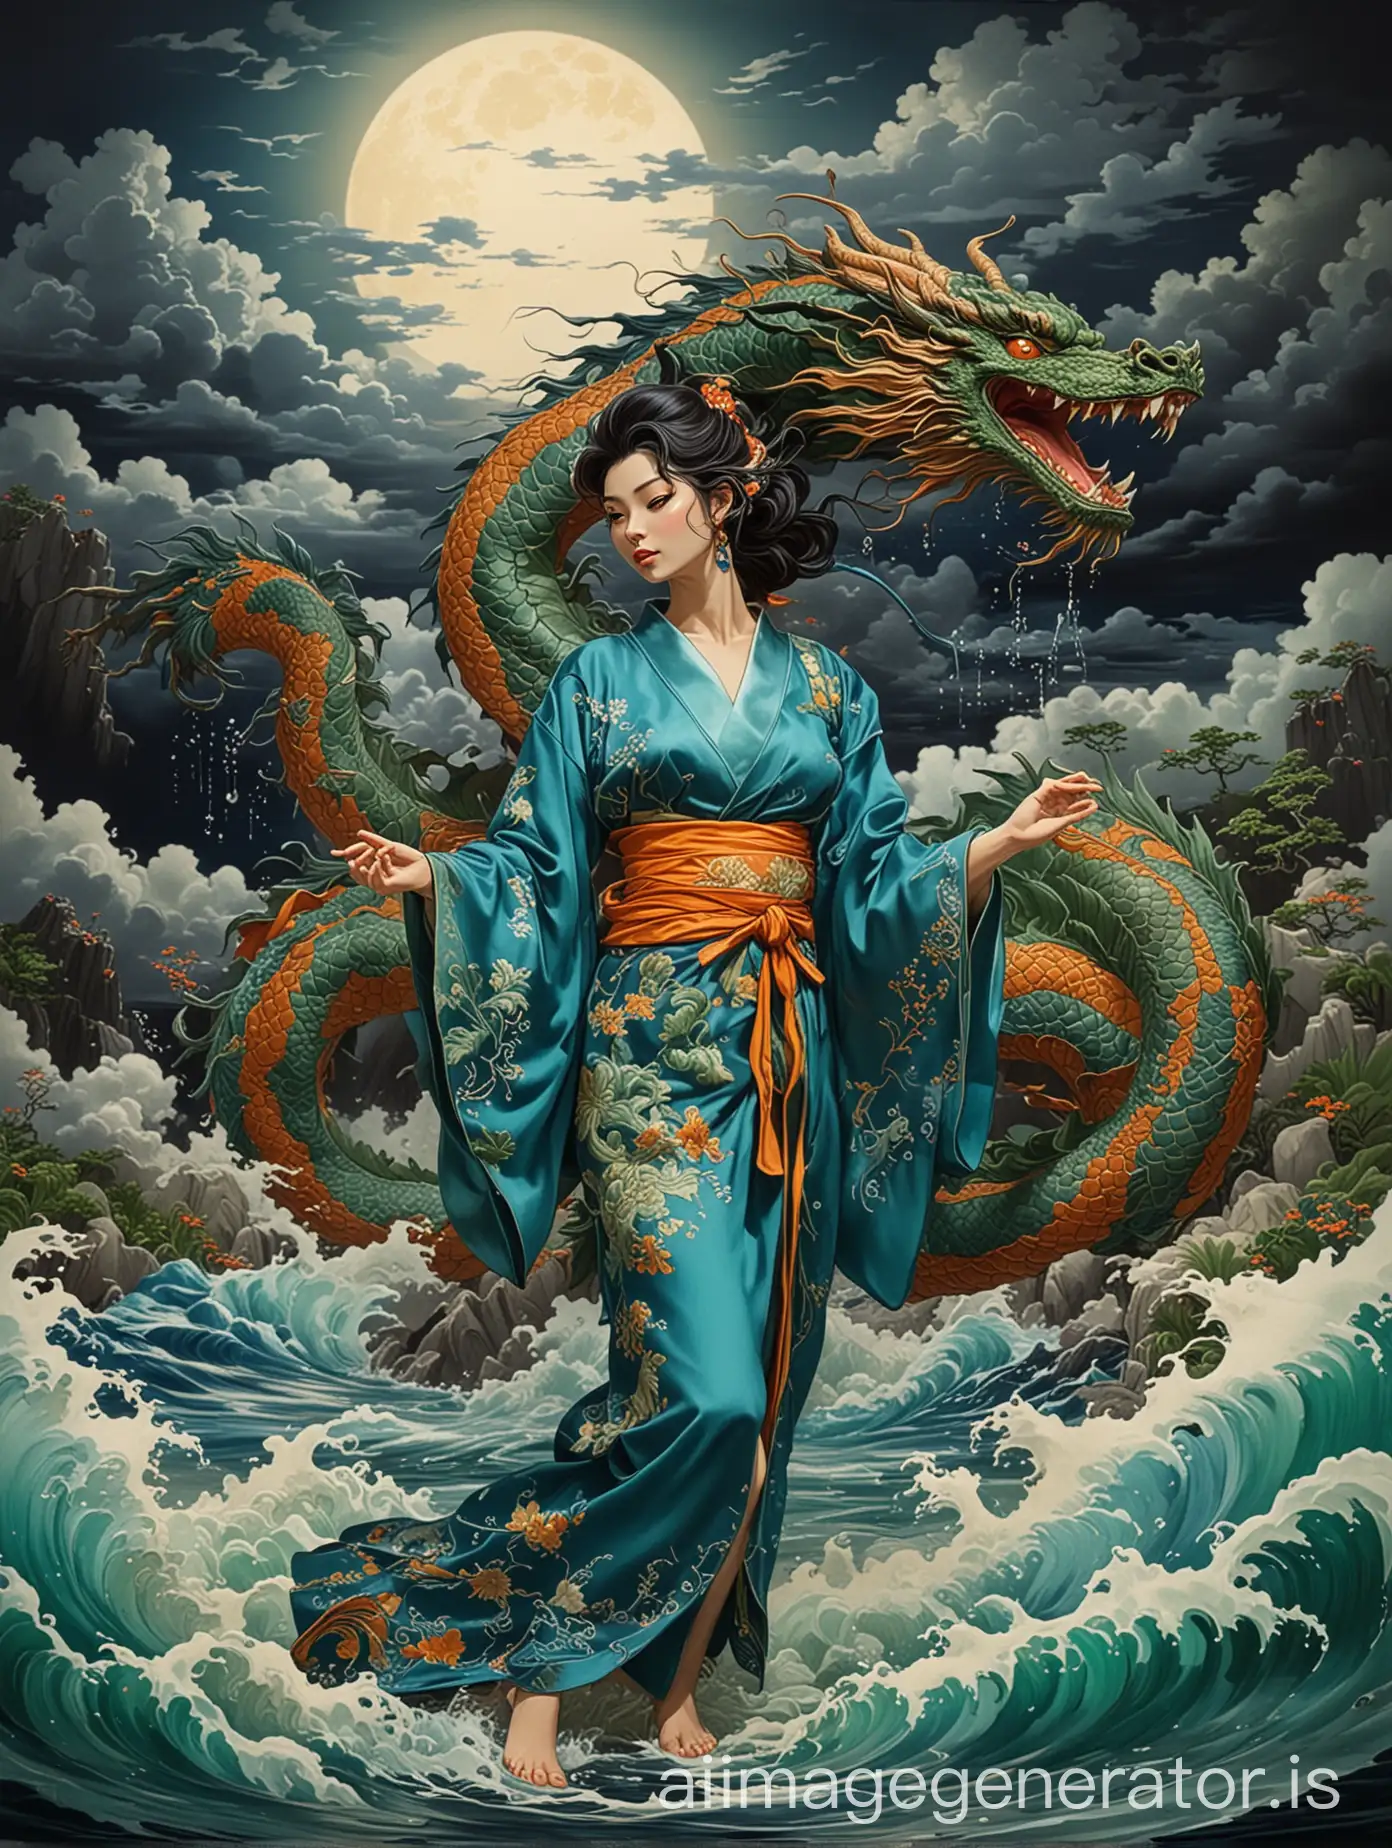 Ralph Bakshi heavy influenced style, woman graceful posing, in blue kimono with intricate  green and orange embroidery, facing a dragon, emerging from water, embracing a japanese style dragon with blue and green scales, fullmoon in the background, billowed stormy clouds